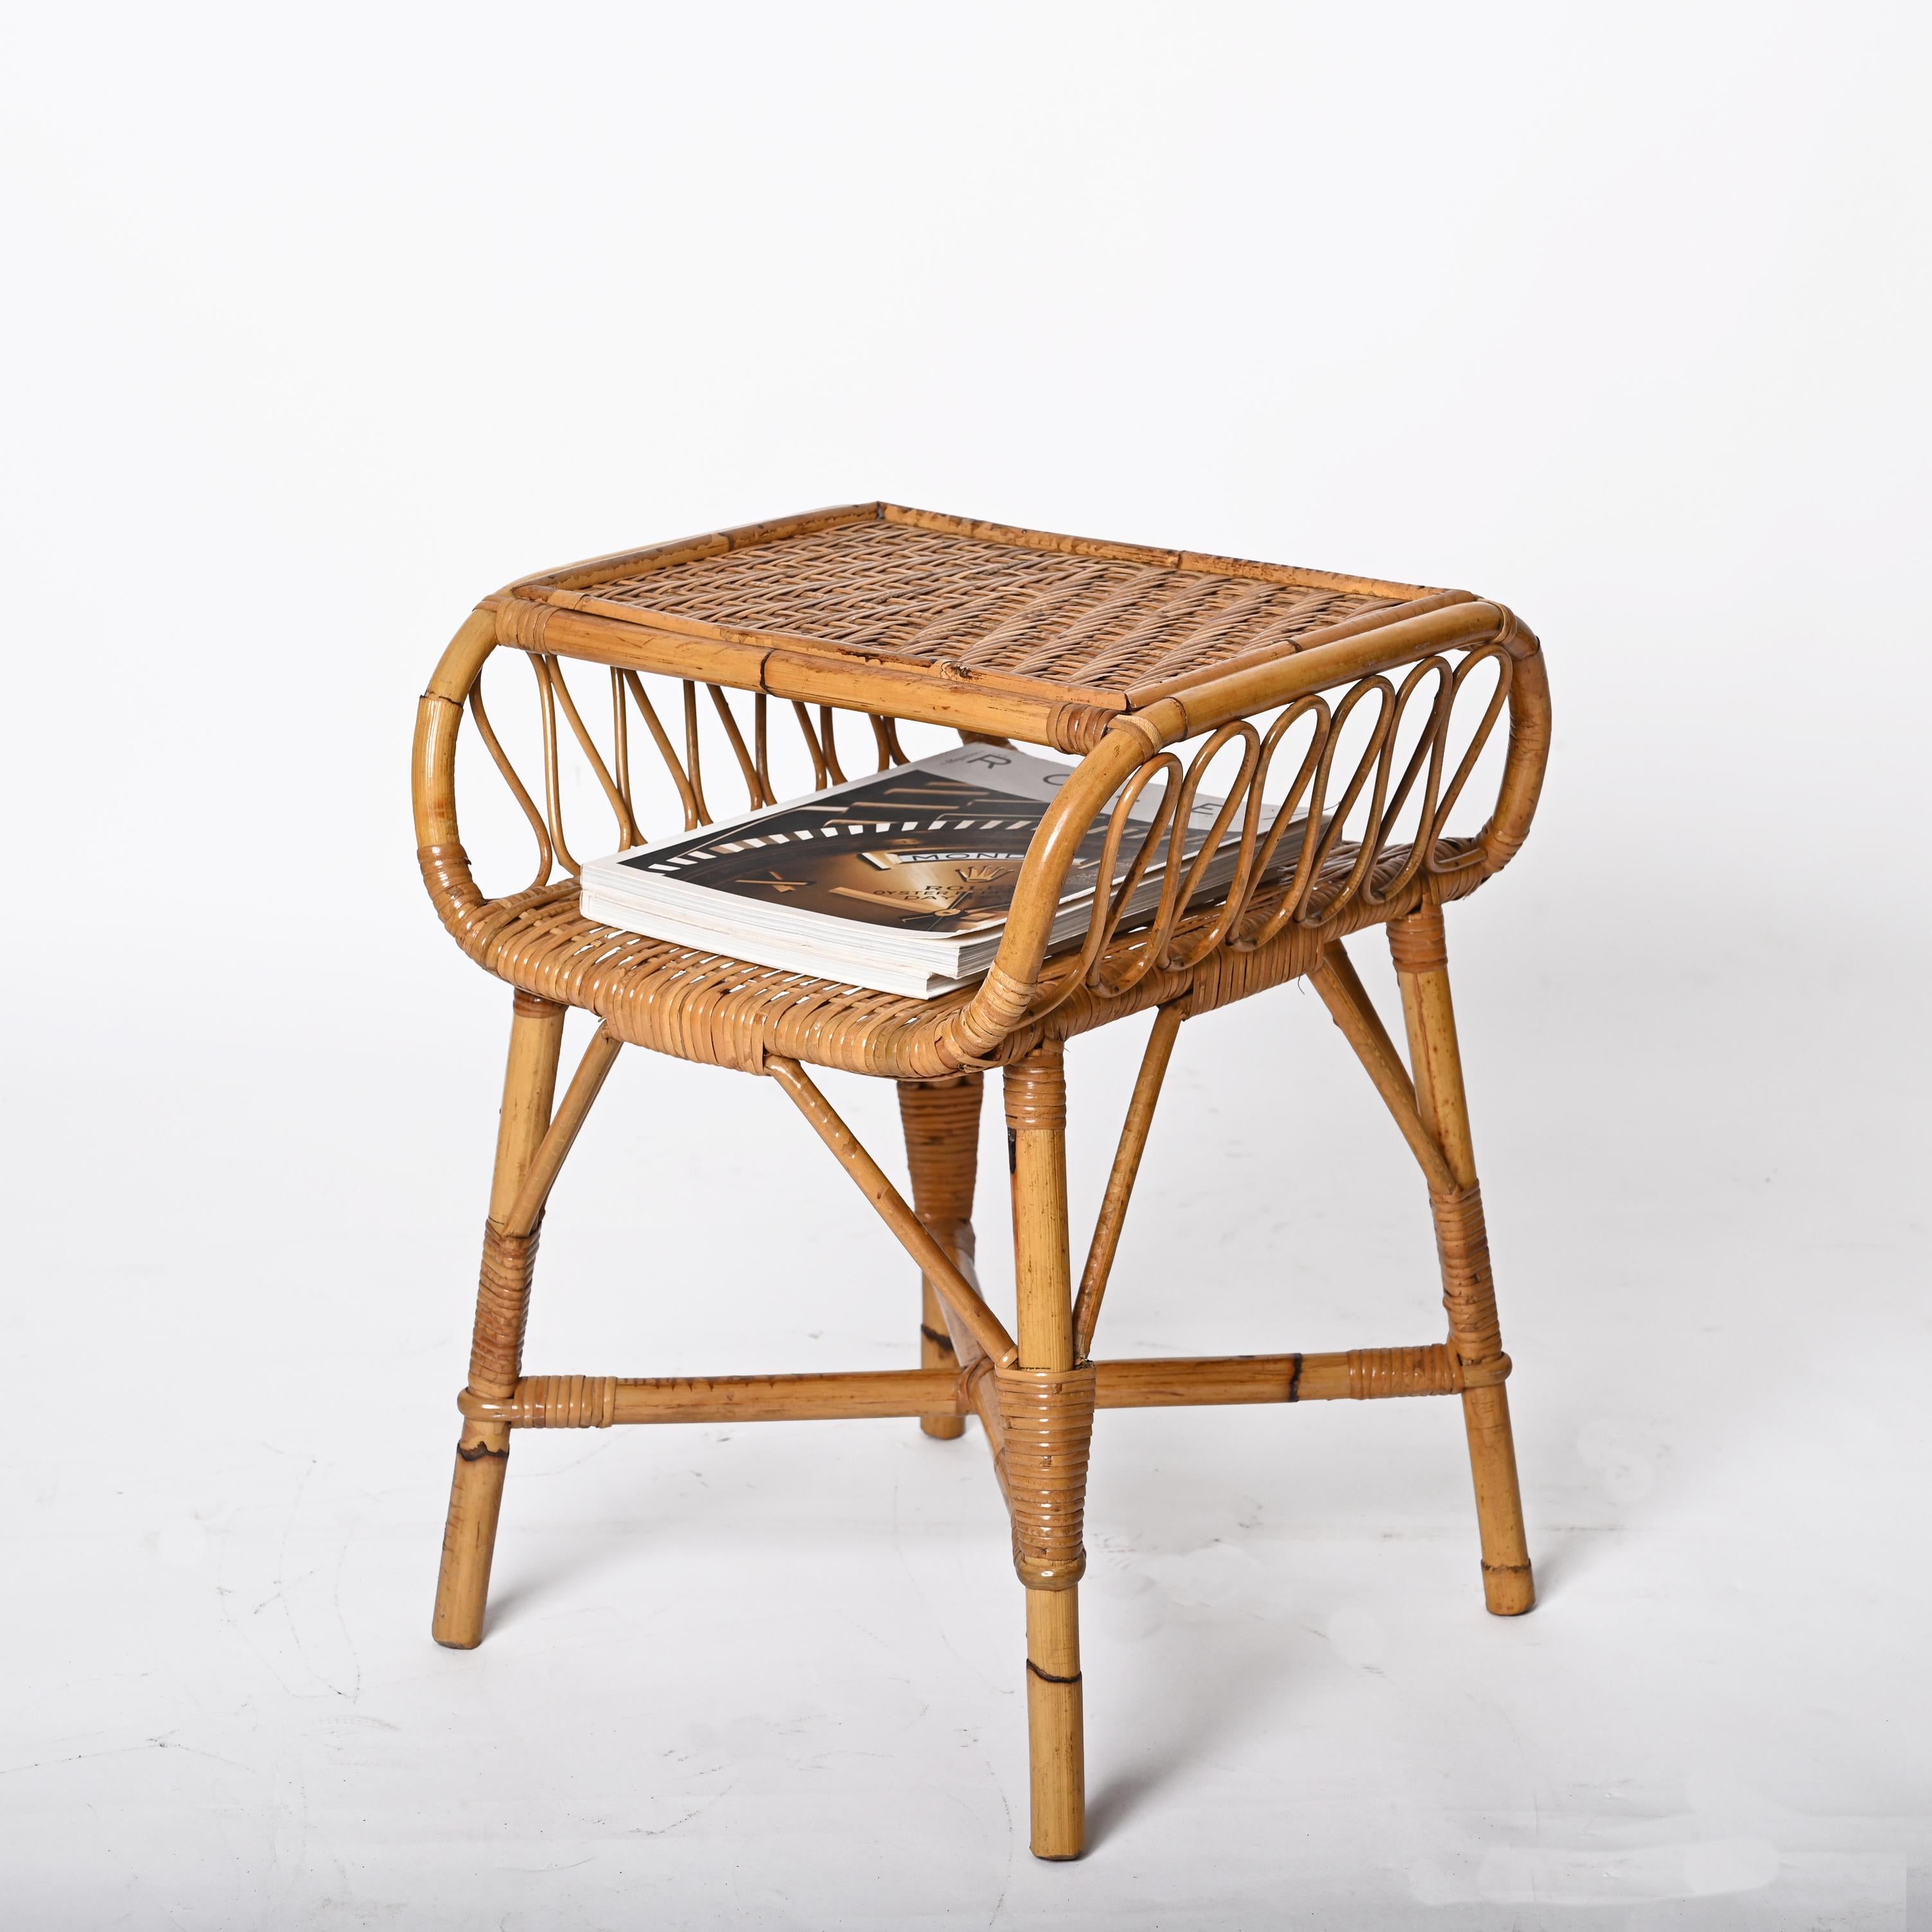 20th Century Midcentury Modern Bamboo Rattan and Wood Italian Bedside Table, 1960s